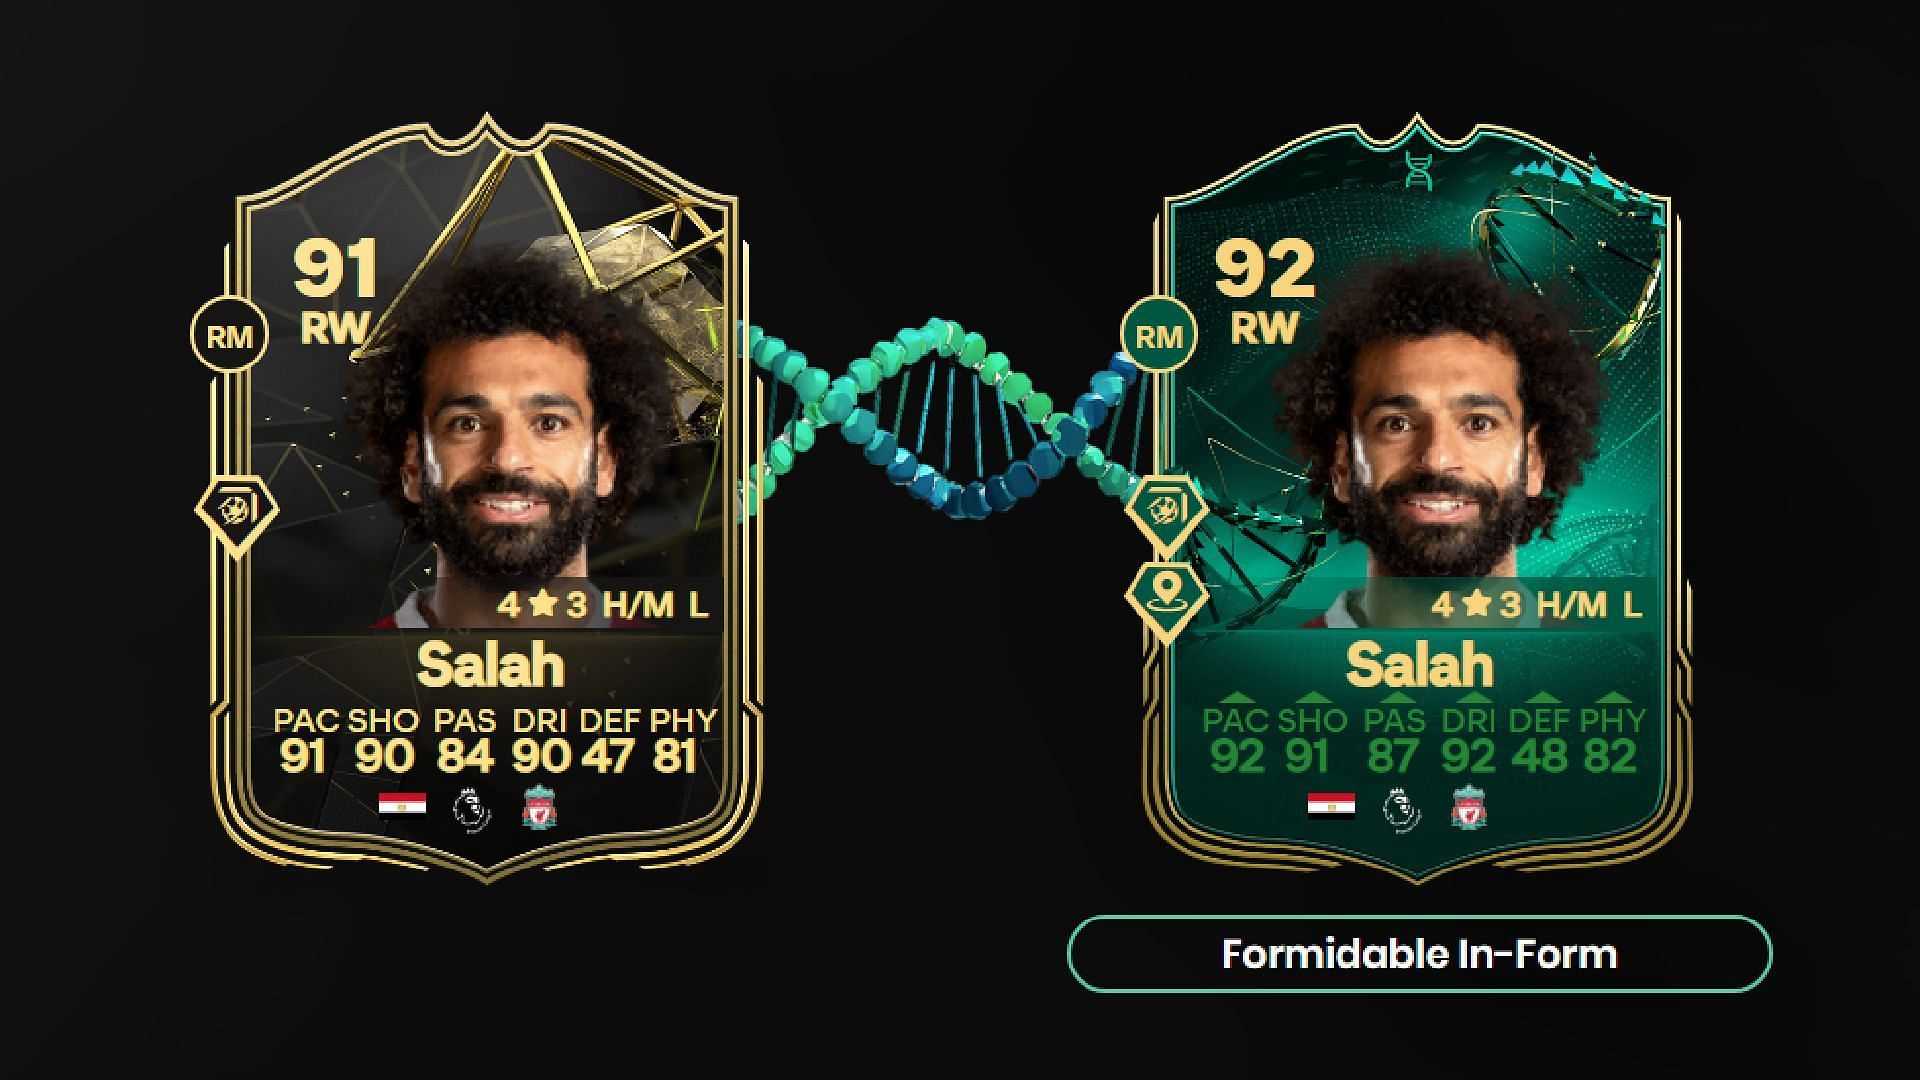 Guide to EA FC 24 Formidable In-Form Evolutions (Image via EA Sports)